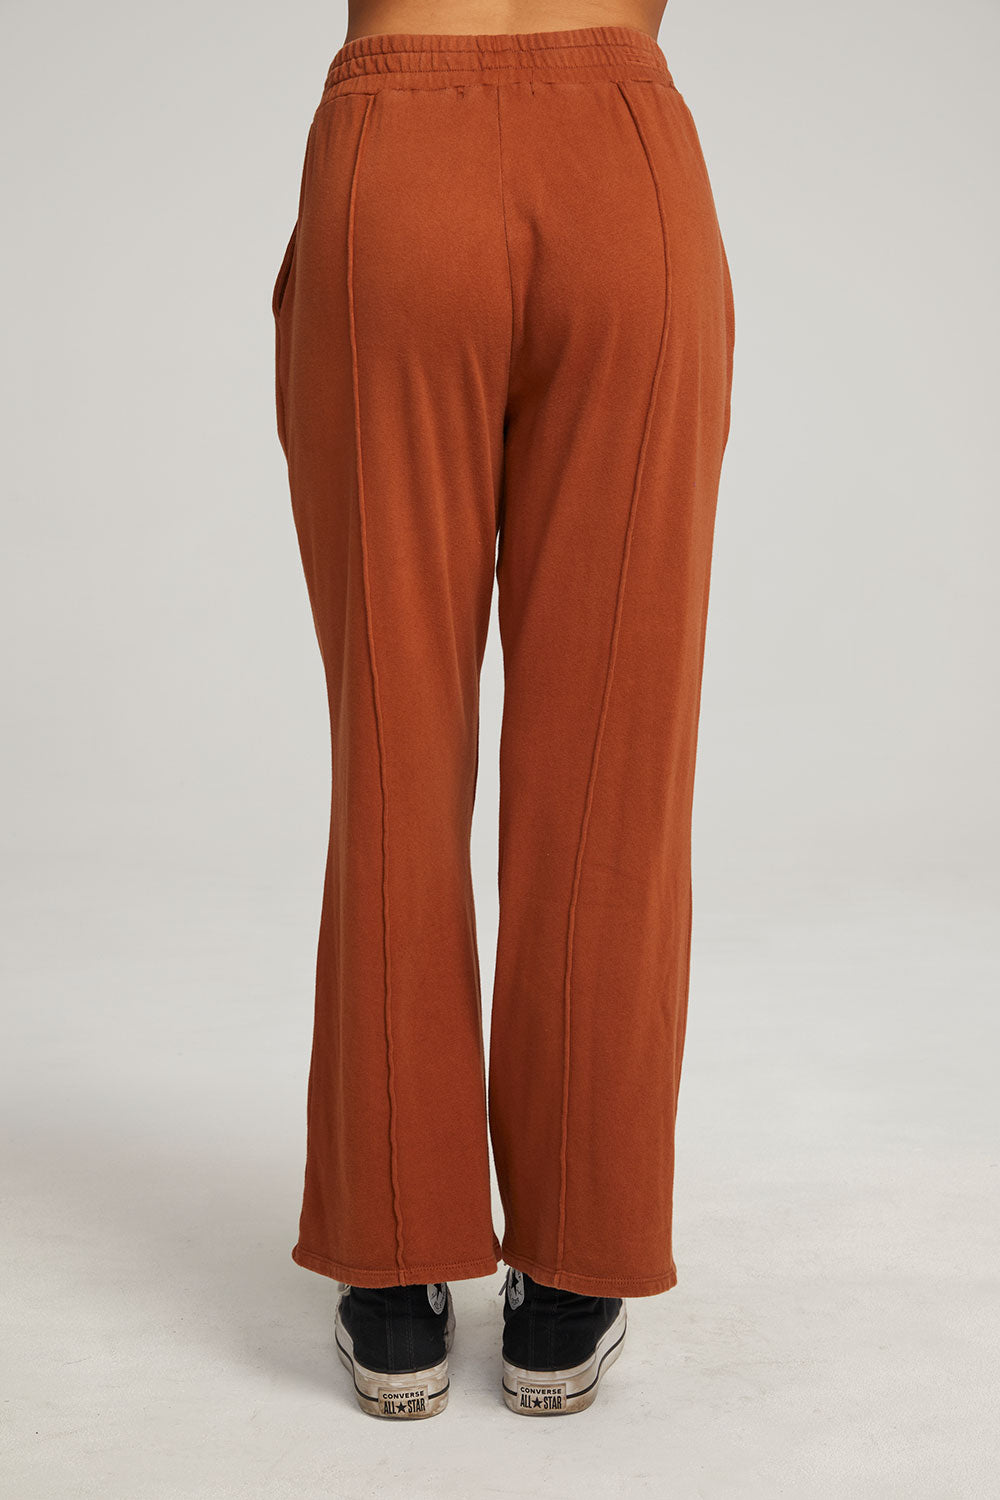 Amarillo Whiskey Trousers WOMENS chaserbrand